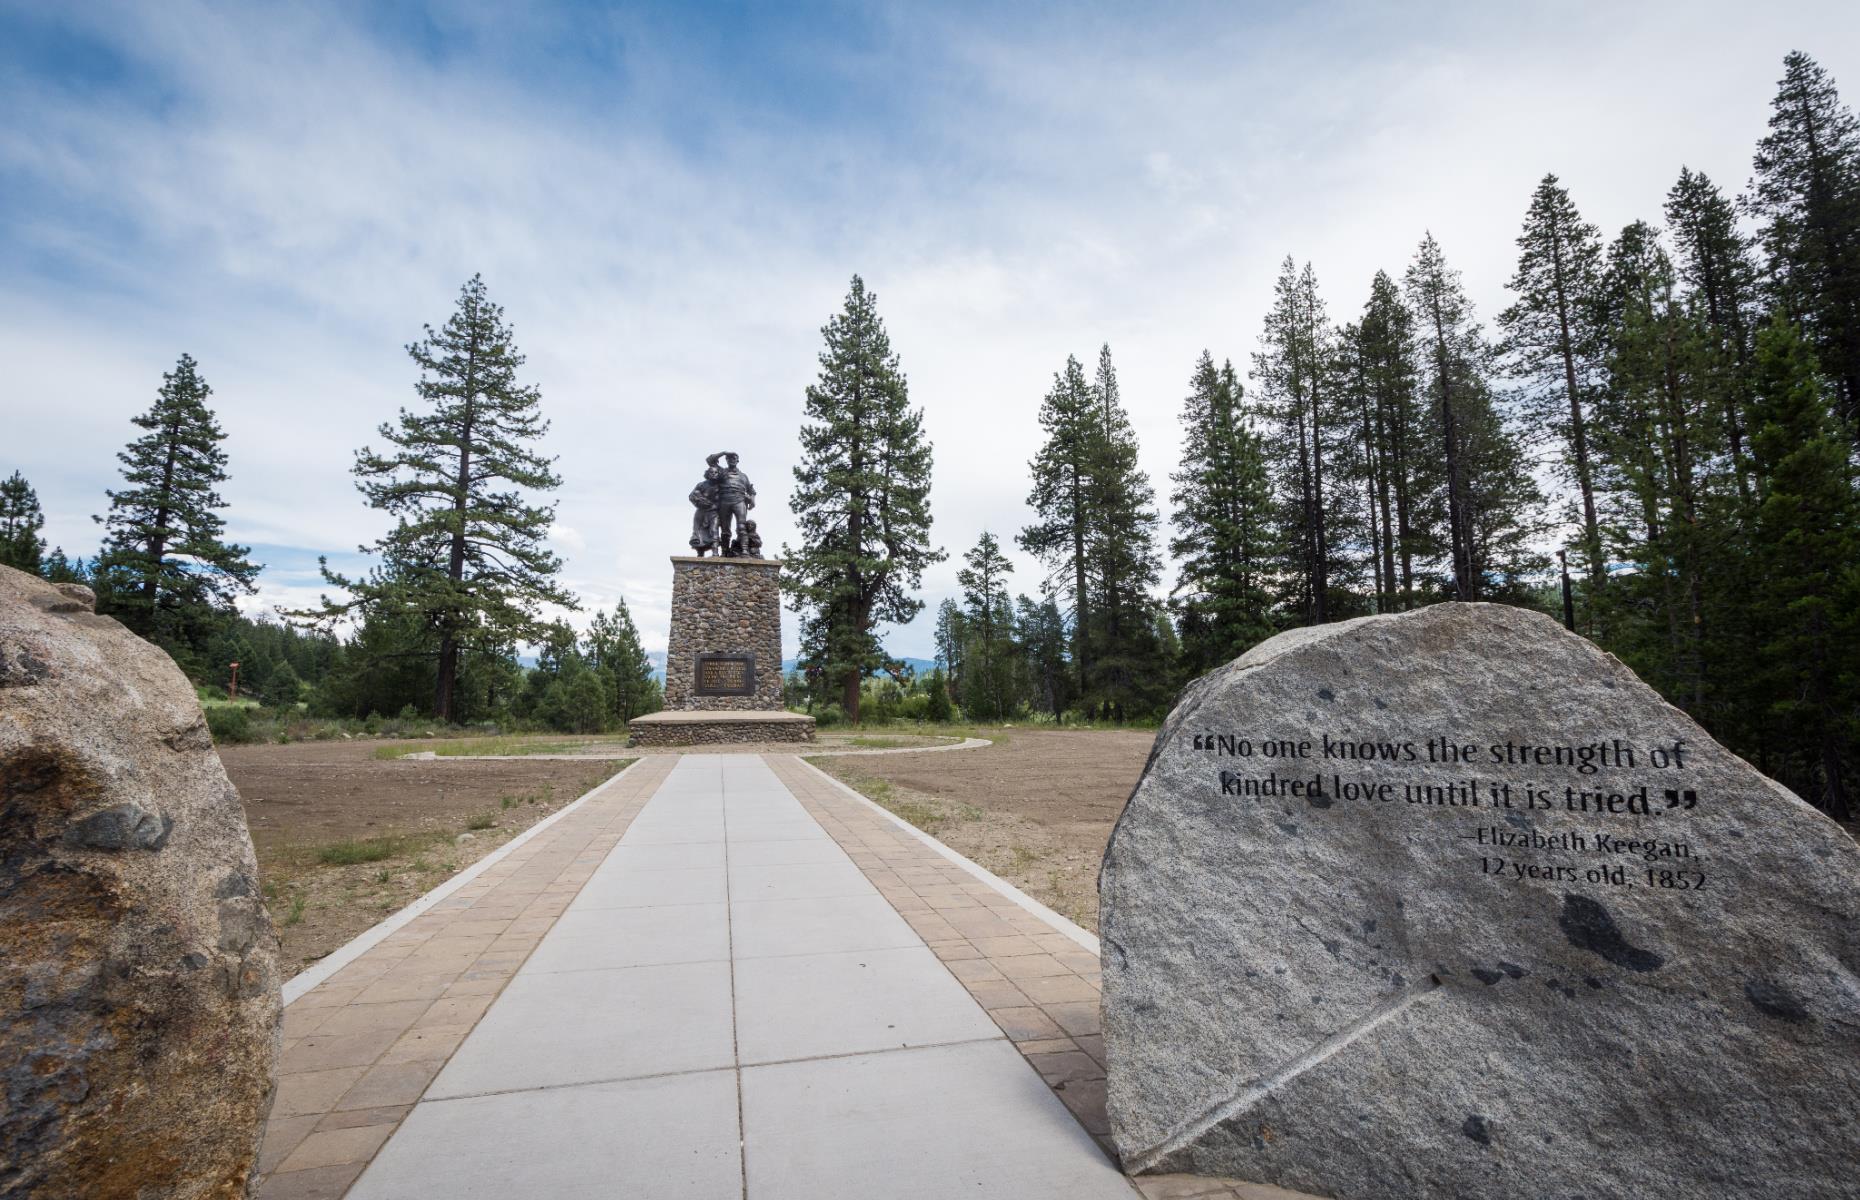 <p><a href="https://www.parks.ca.gov/?page_id=503">Donner Memorial State Park</a> is home to the Donner Camp, the site where the famed Donner Party were stranded in 1846/47 while migrating through the Sierra Nevada mountains. There is a memorial statue that honors not only the Donners (many of whom perished) but other pioneers and indigenous peoples who settled in the western part of the country. Today the camp site is part of a beautiful state park, popular with hikers and campers.</p>  <p><a href="https://www.loveexploring.com/galleries/86372/the-most-beautiful-state-park-in-every-us-state?page=1"><strong>These are the most beautiful state parks in every US state</strong></a></p>